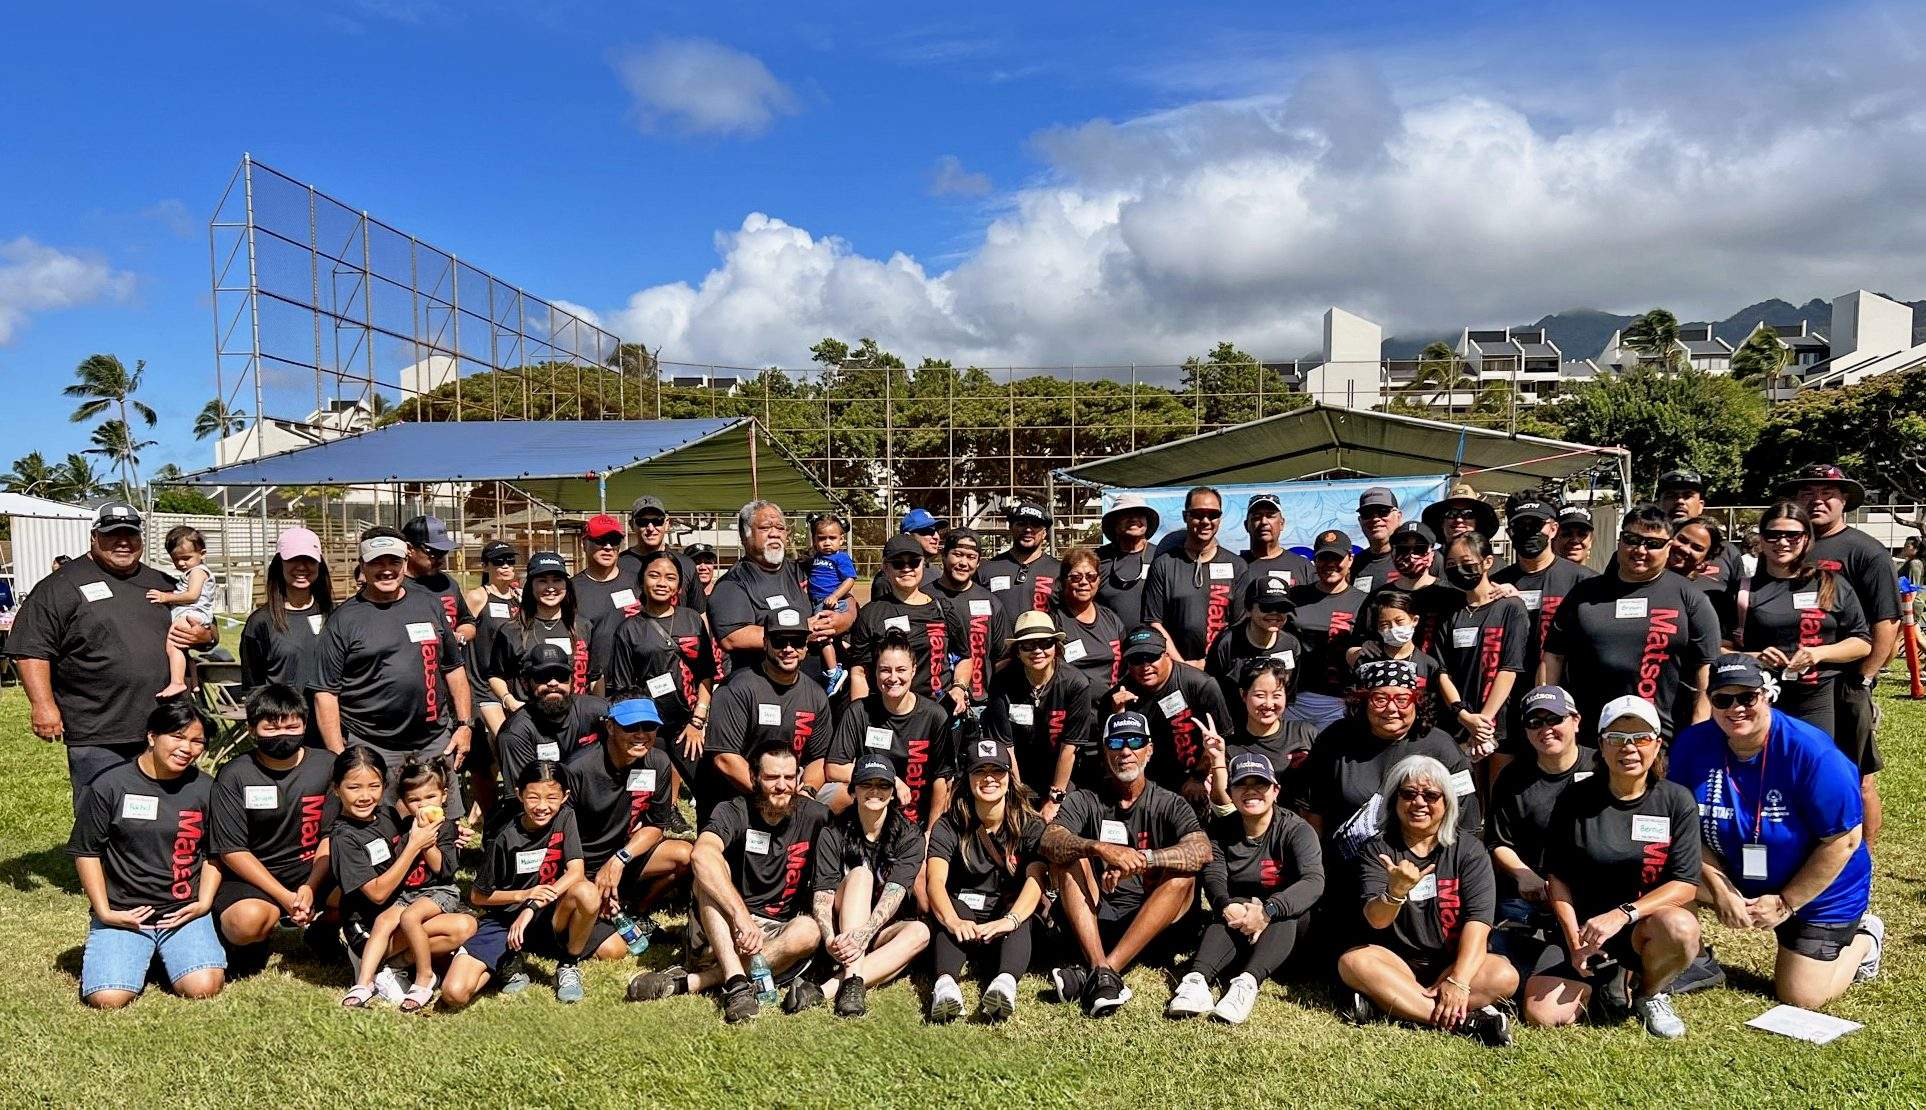 Matson volunteers dressed in black t-shirts with a red Matson logo pose for a group picture with the softball field backstop in the background.